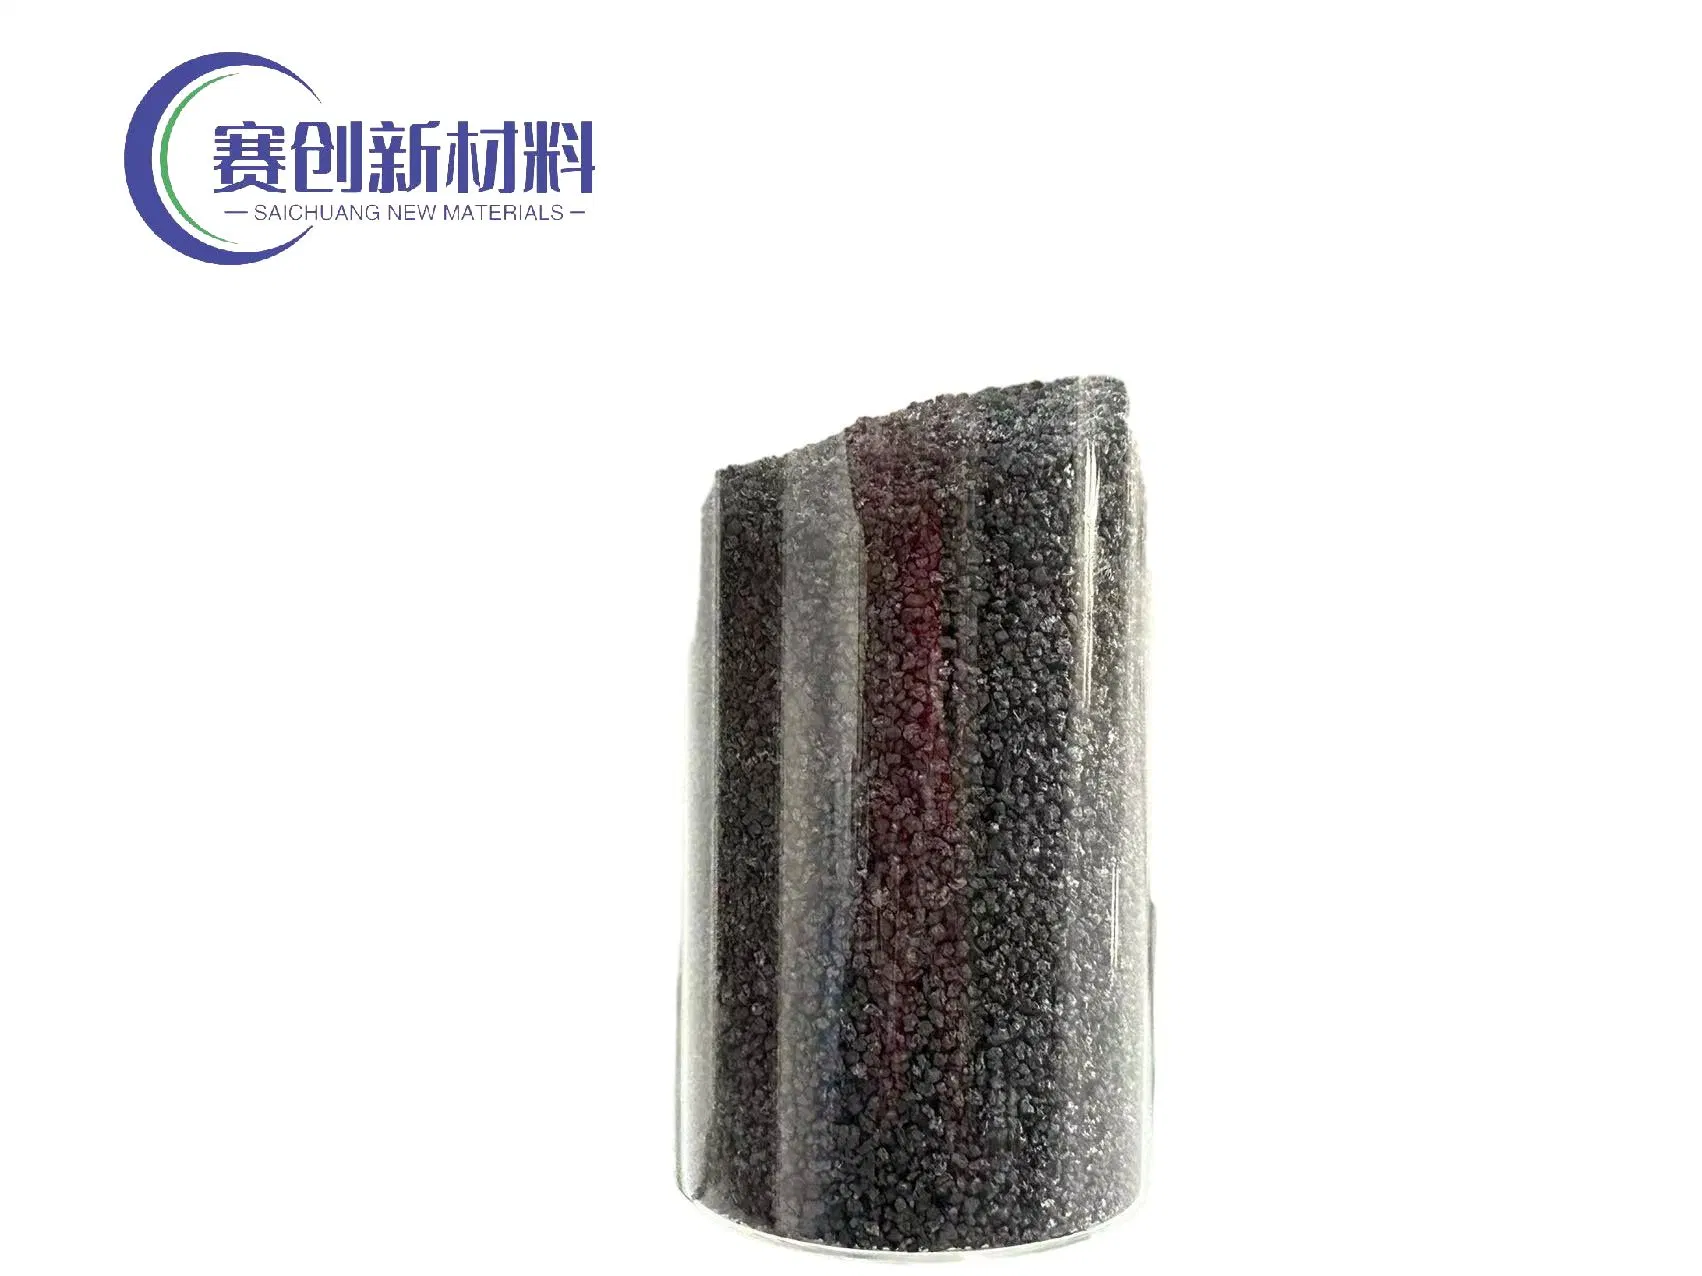 Calcined Petroleum Coke Recarburizer Low Sulfur Carbon Additive for Casting Industry CPC Calcined Pet Coke From